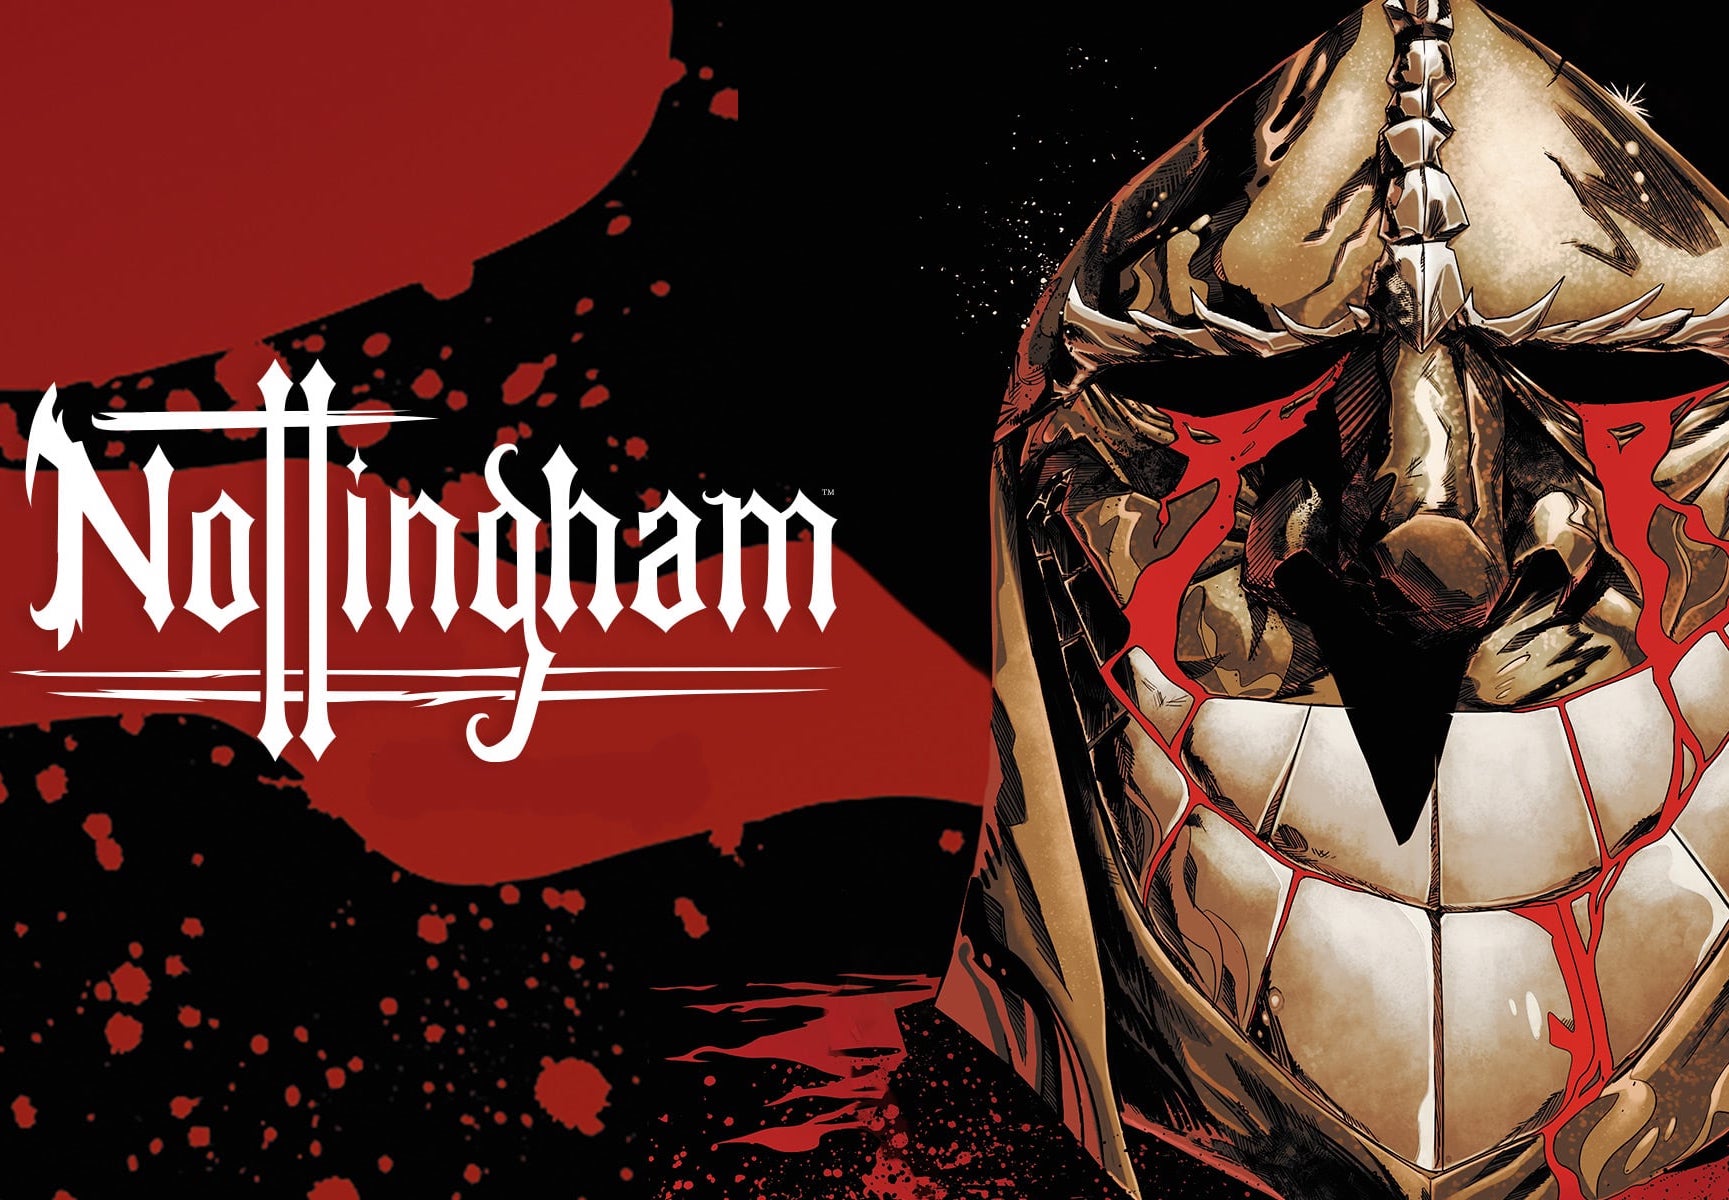 Mad Cave's 'Nottingham Vol. 1: Death and Taxes' gets hardcover edition